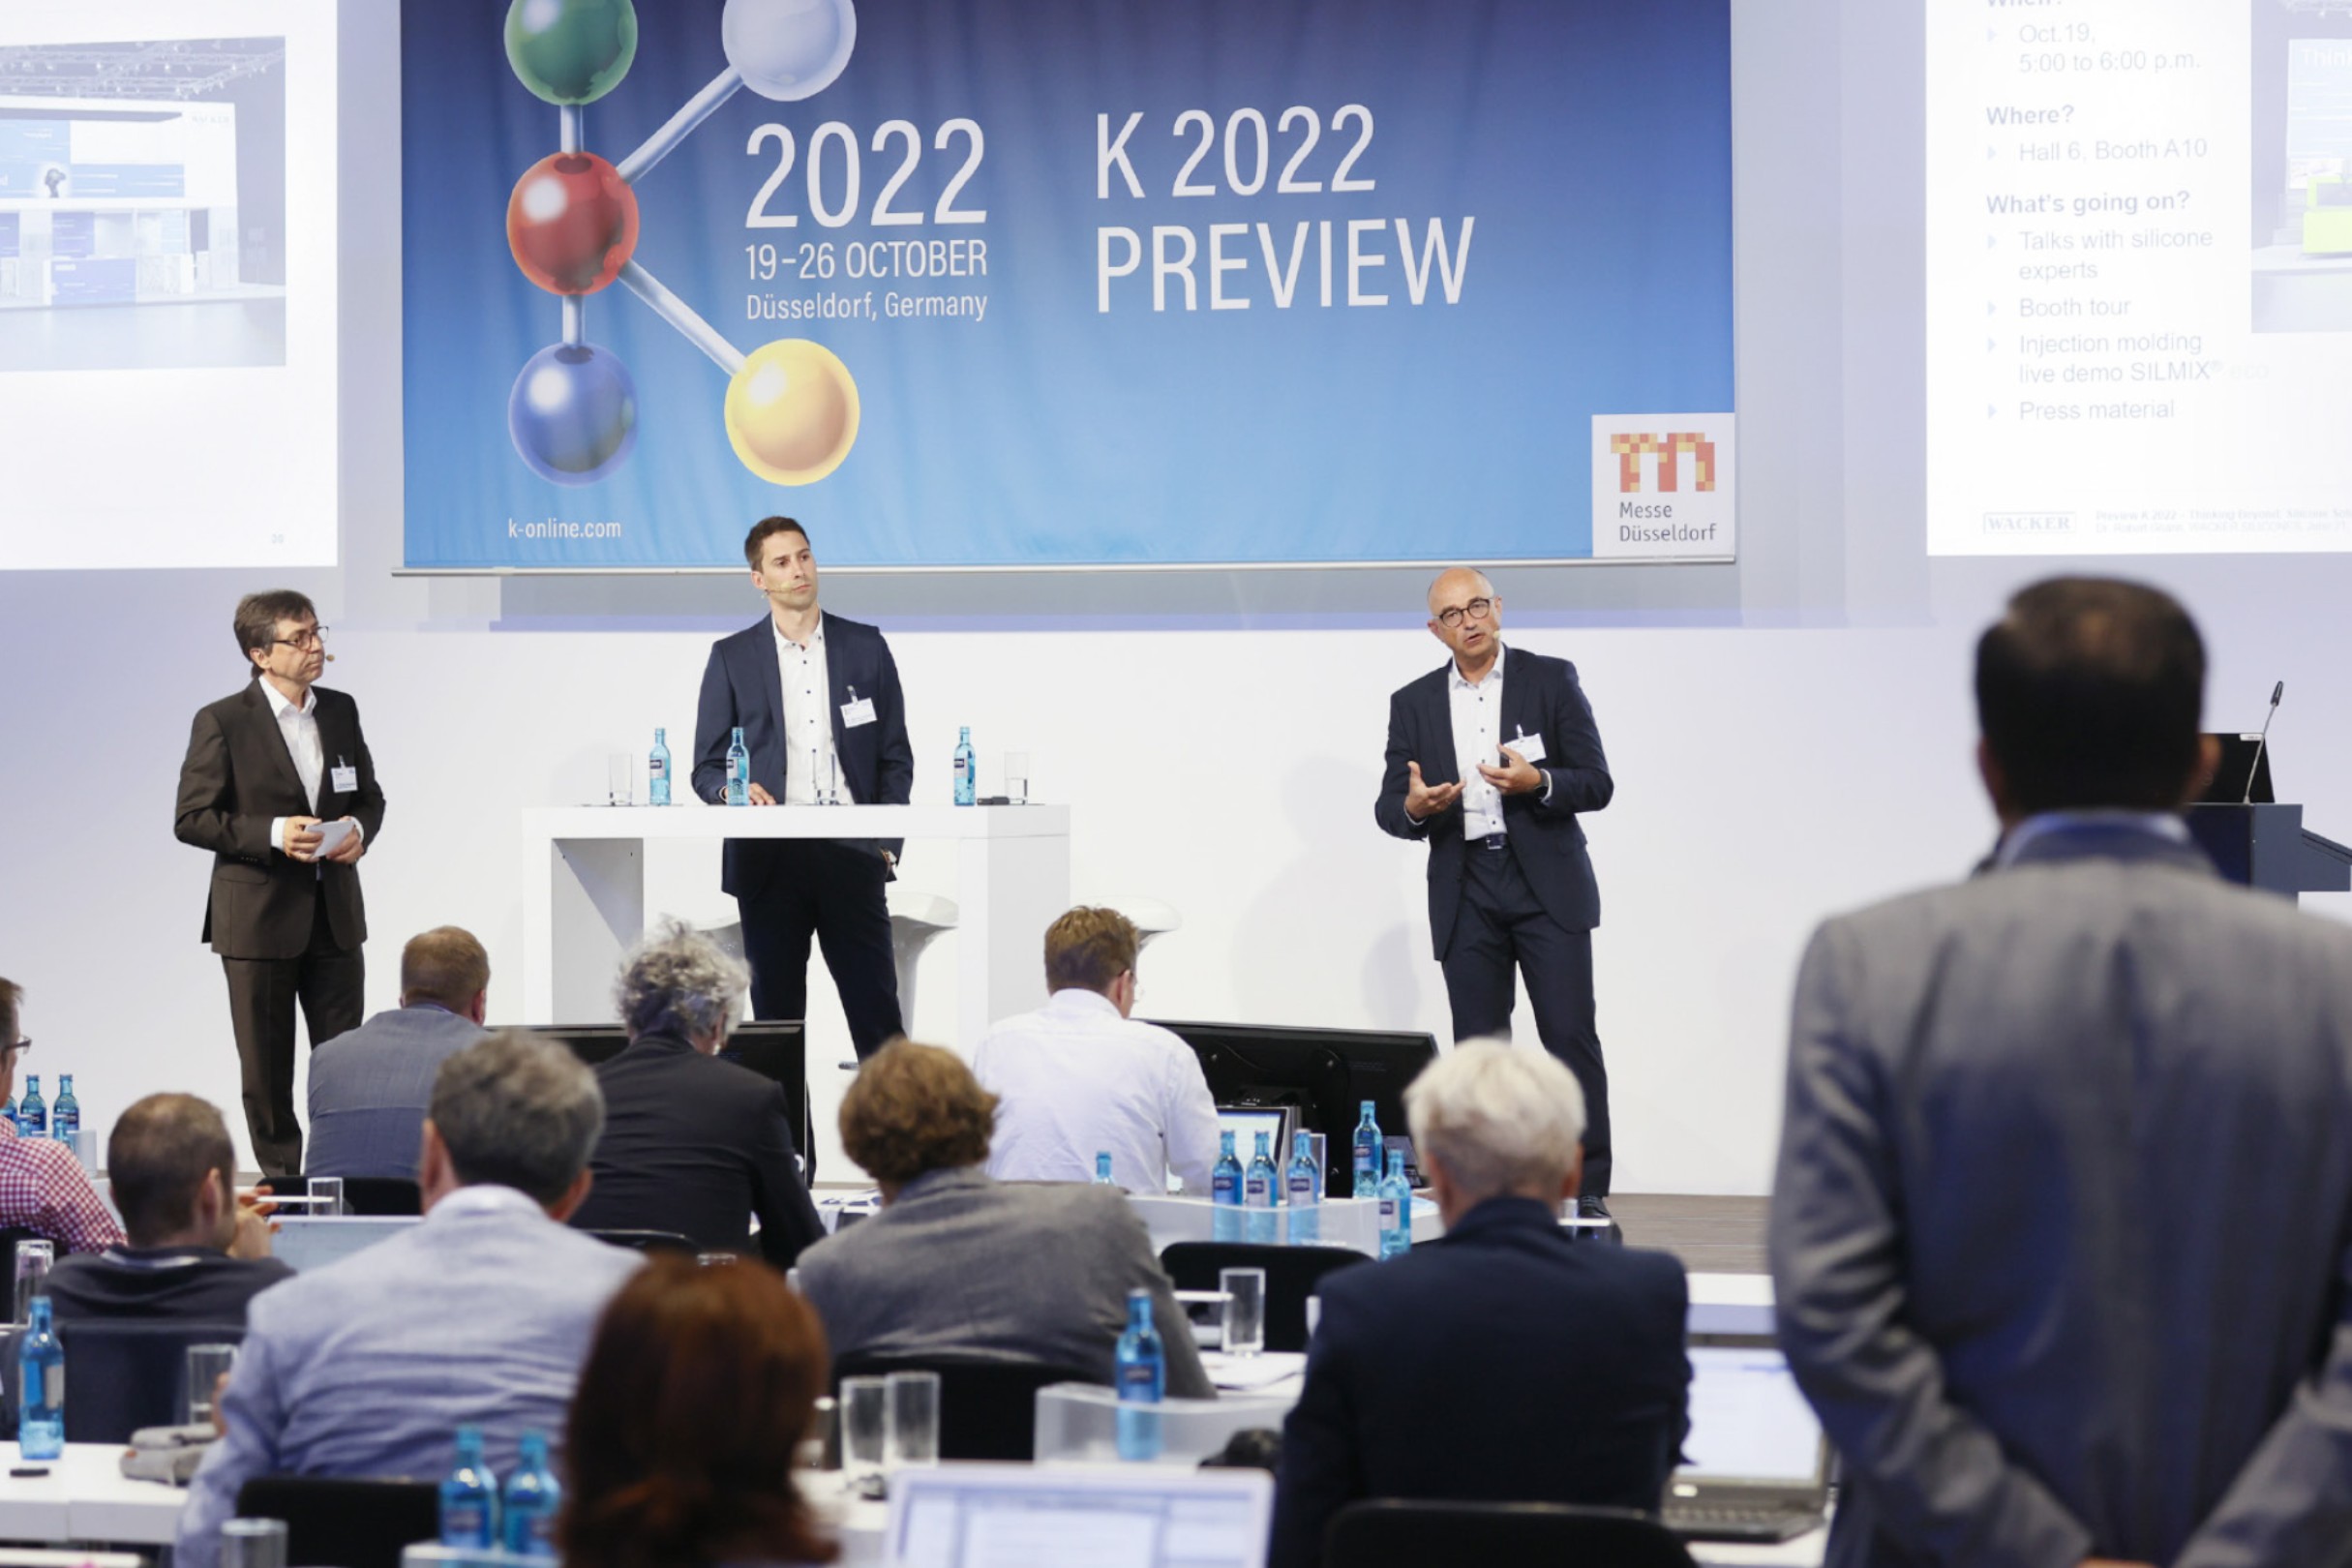 Dr. Robert Gnann at an event previewing the K 2022 plastics and rubber tradeshow